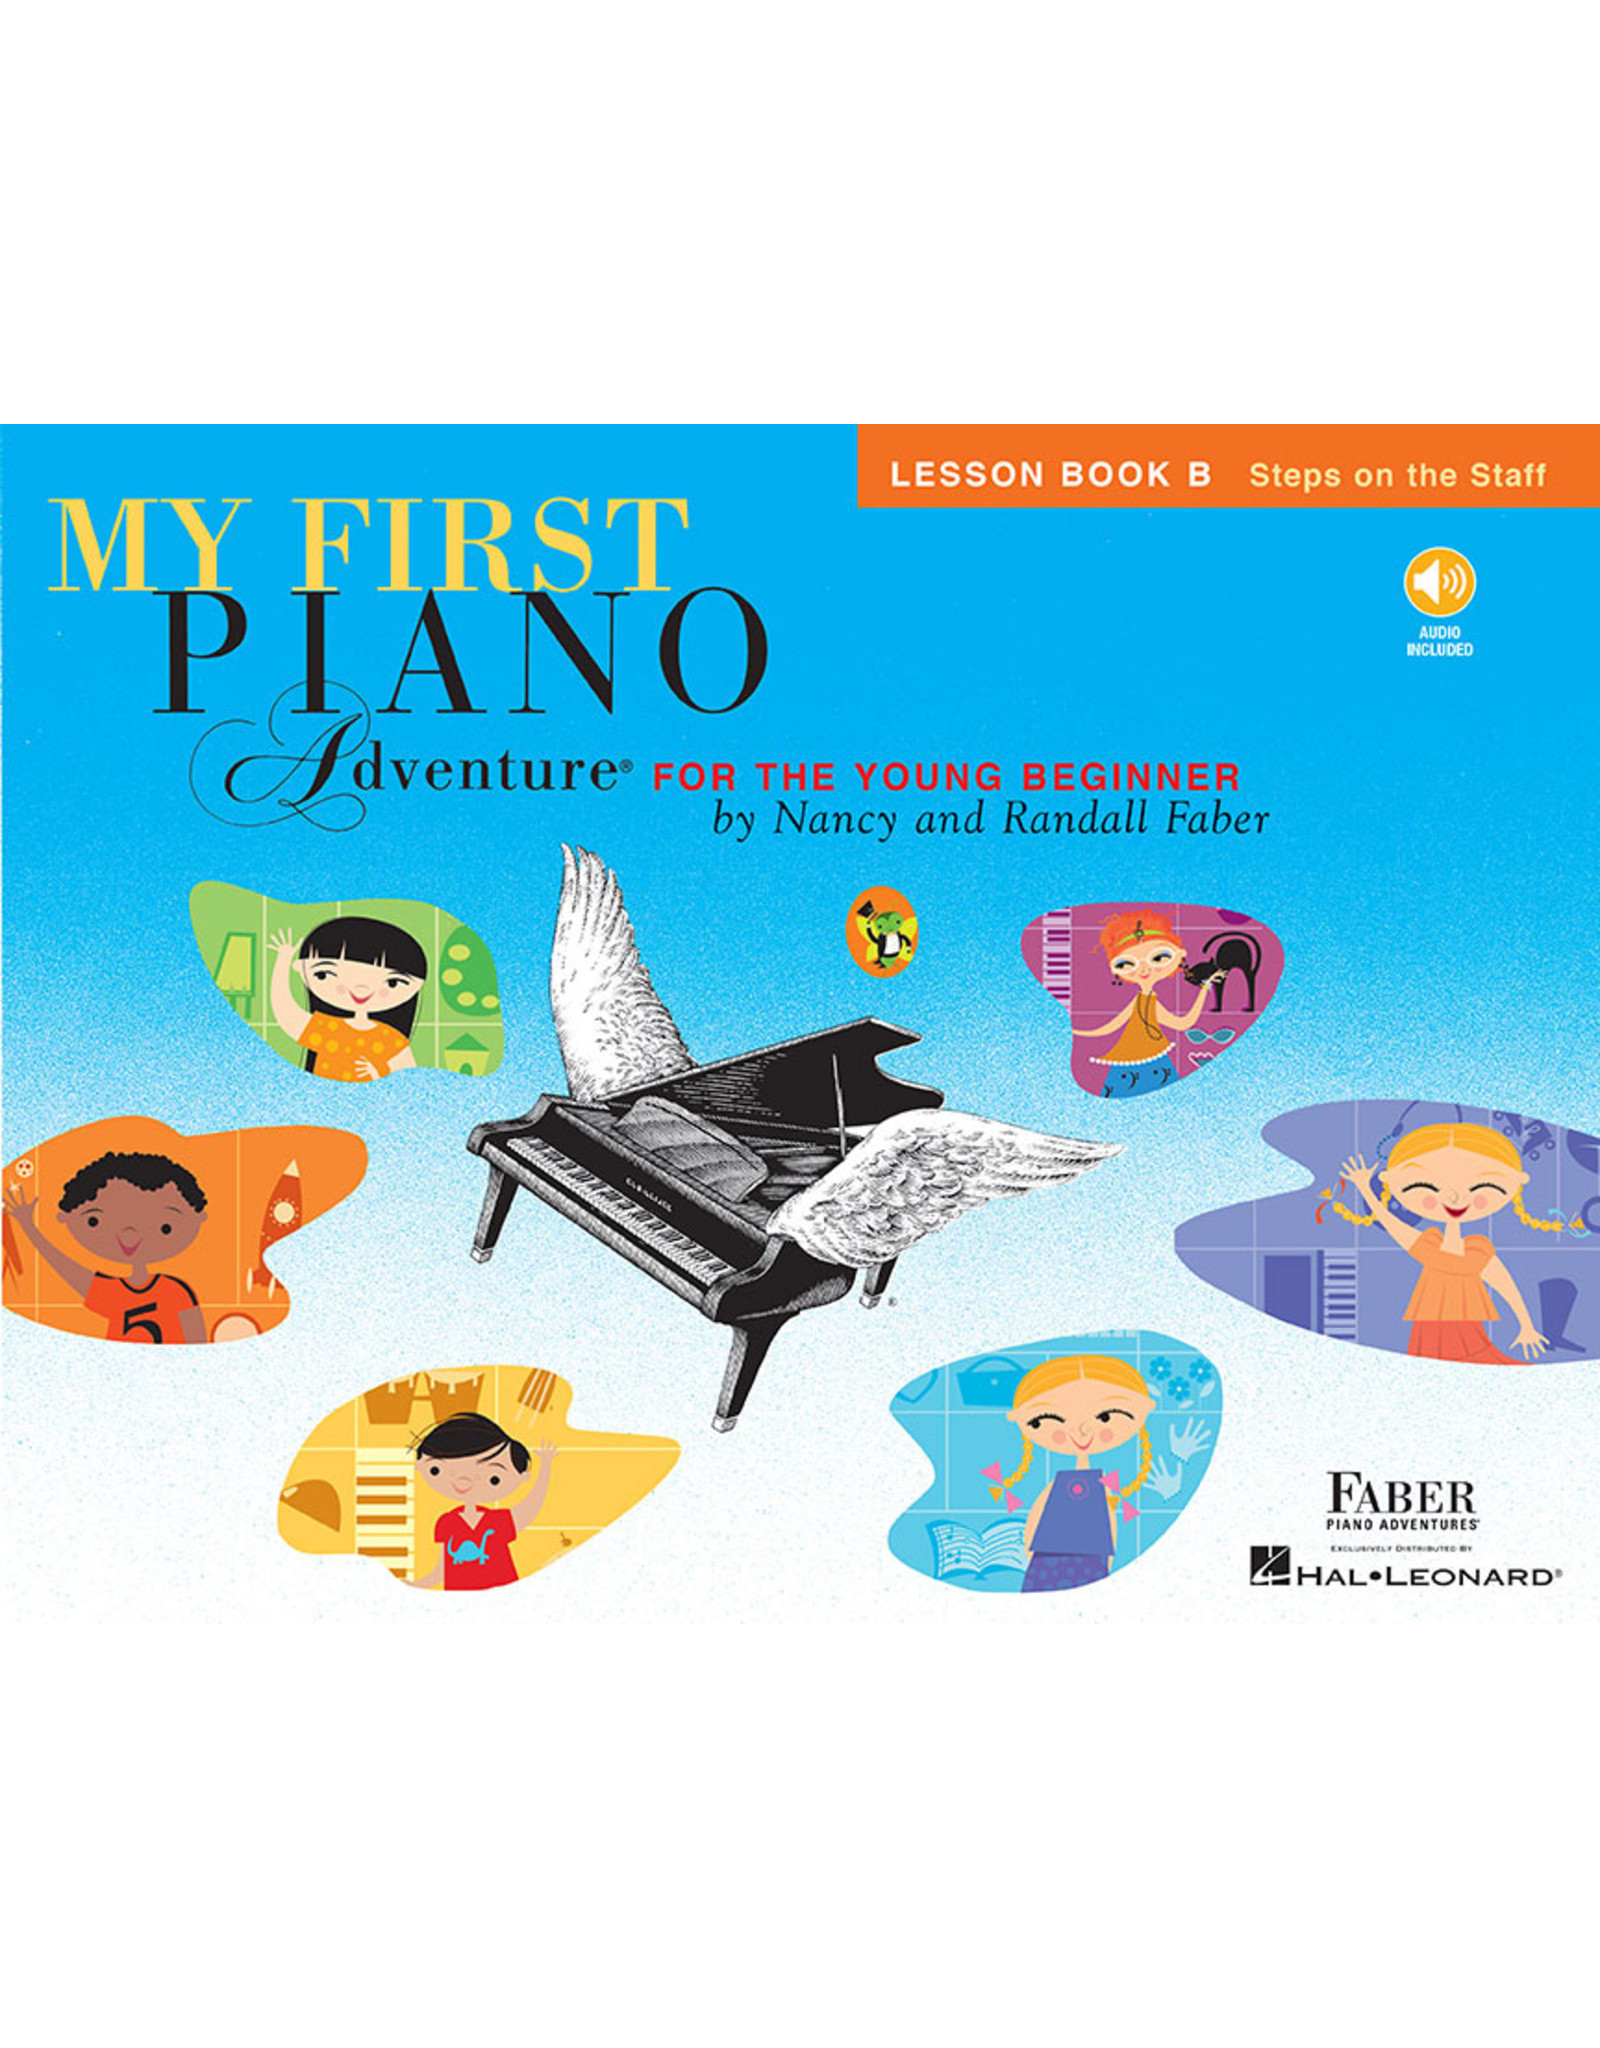 Faber Piano Adventures Faber My First Piano Adventure